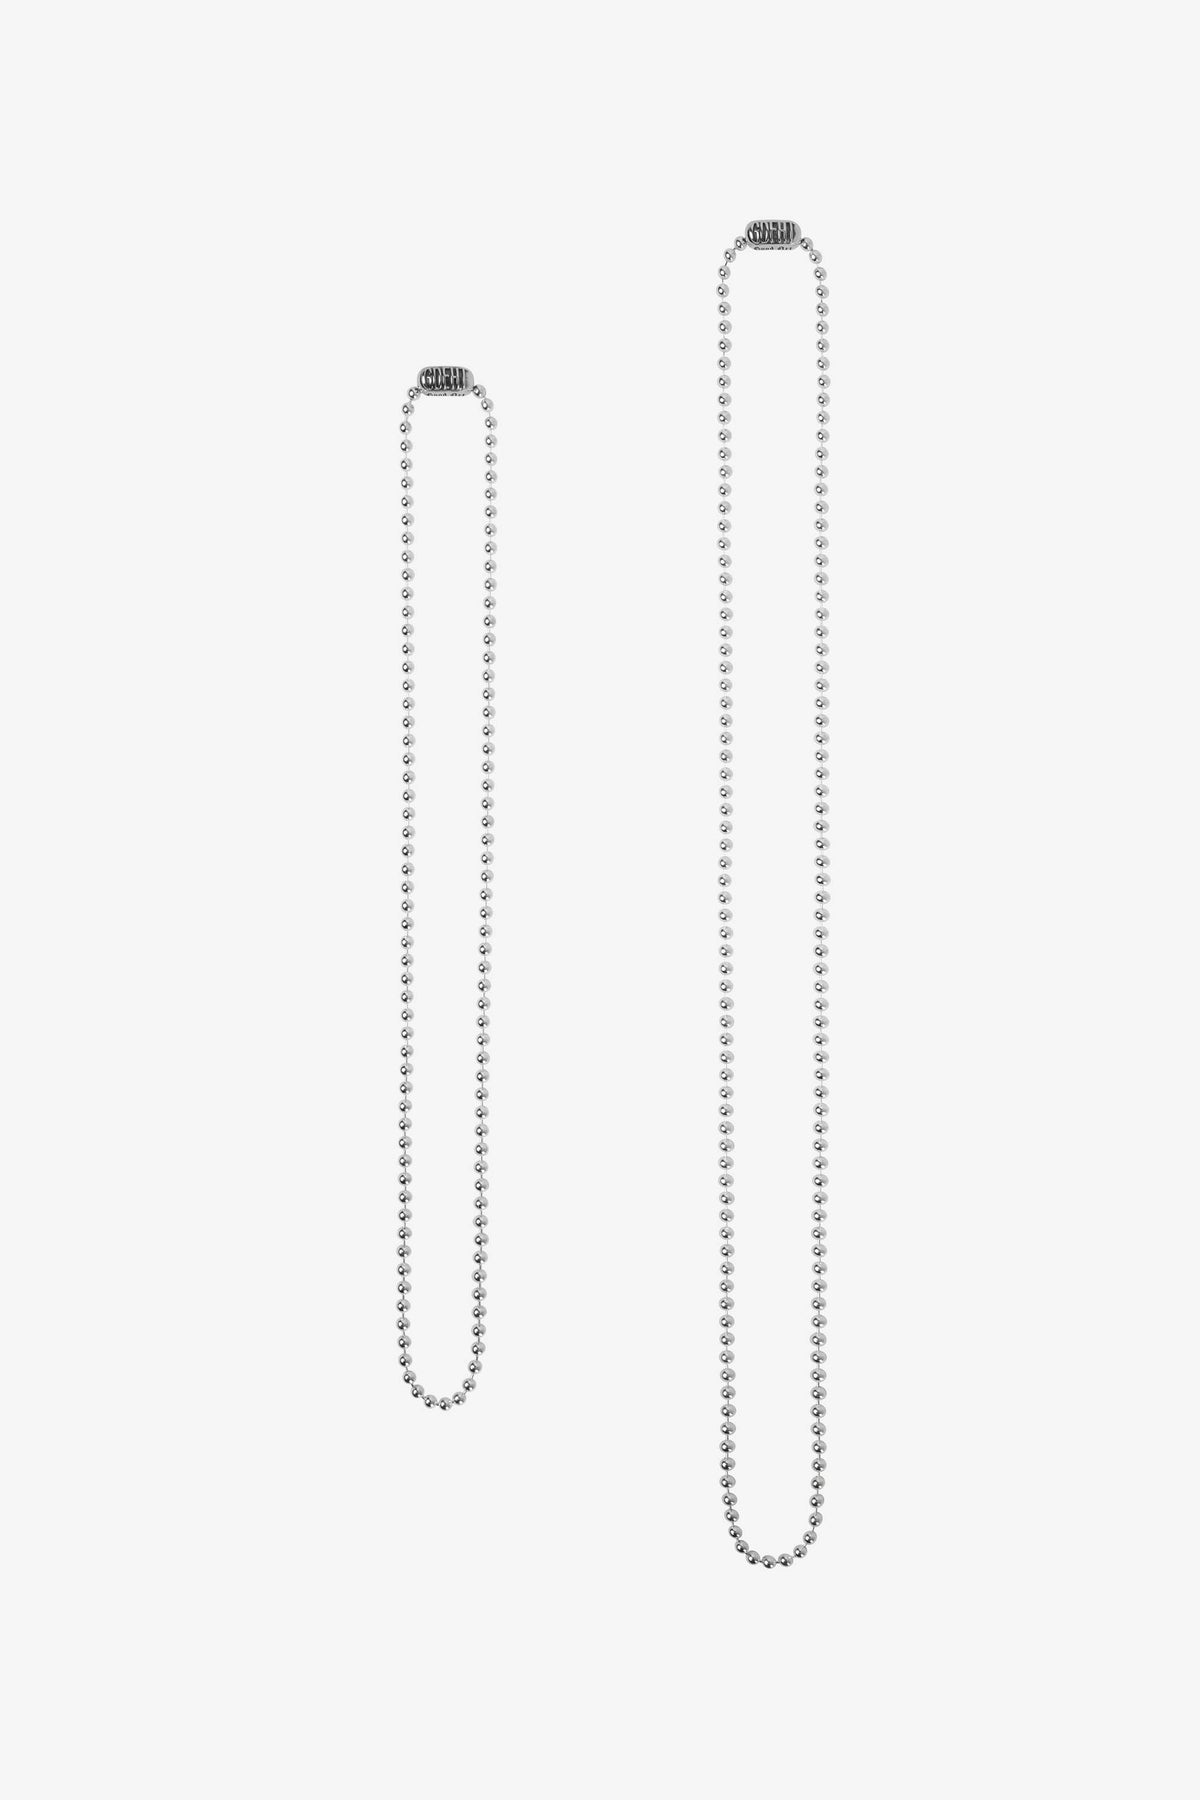 Good Art Hlywd for Goodfight MINI Ball Chain Necklace